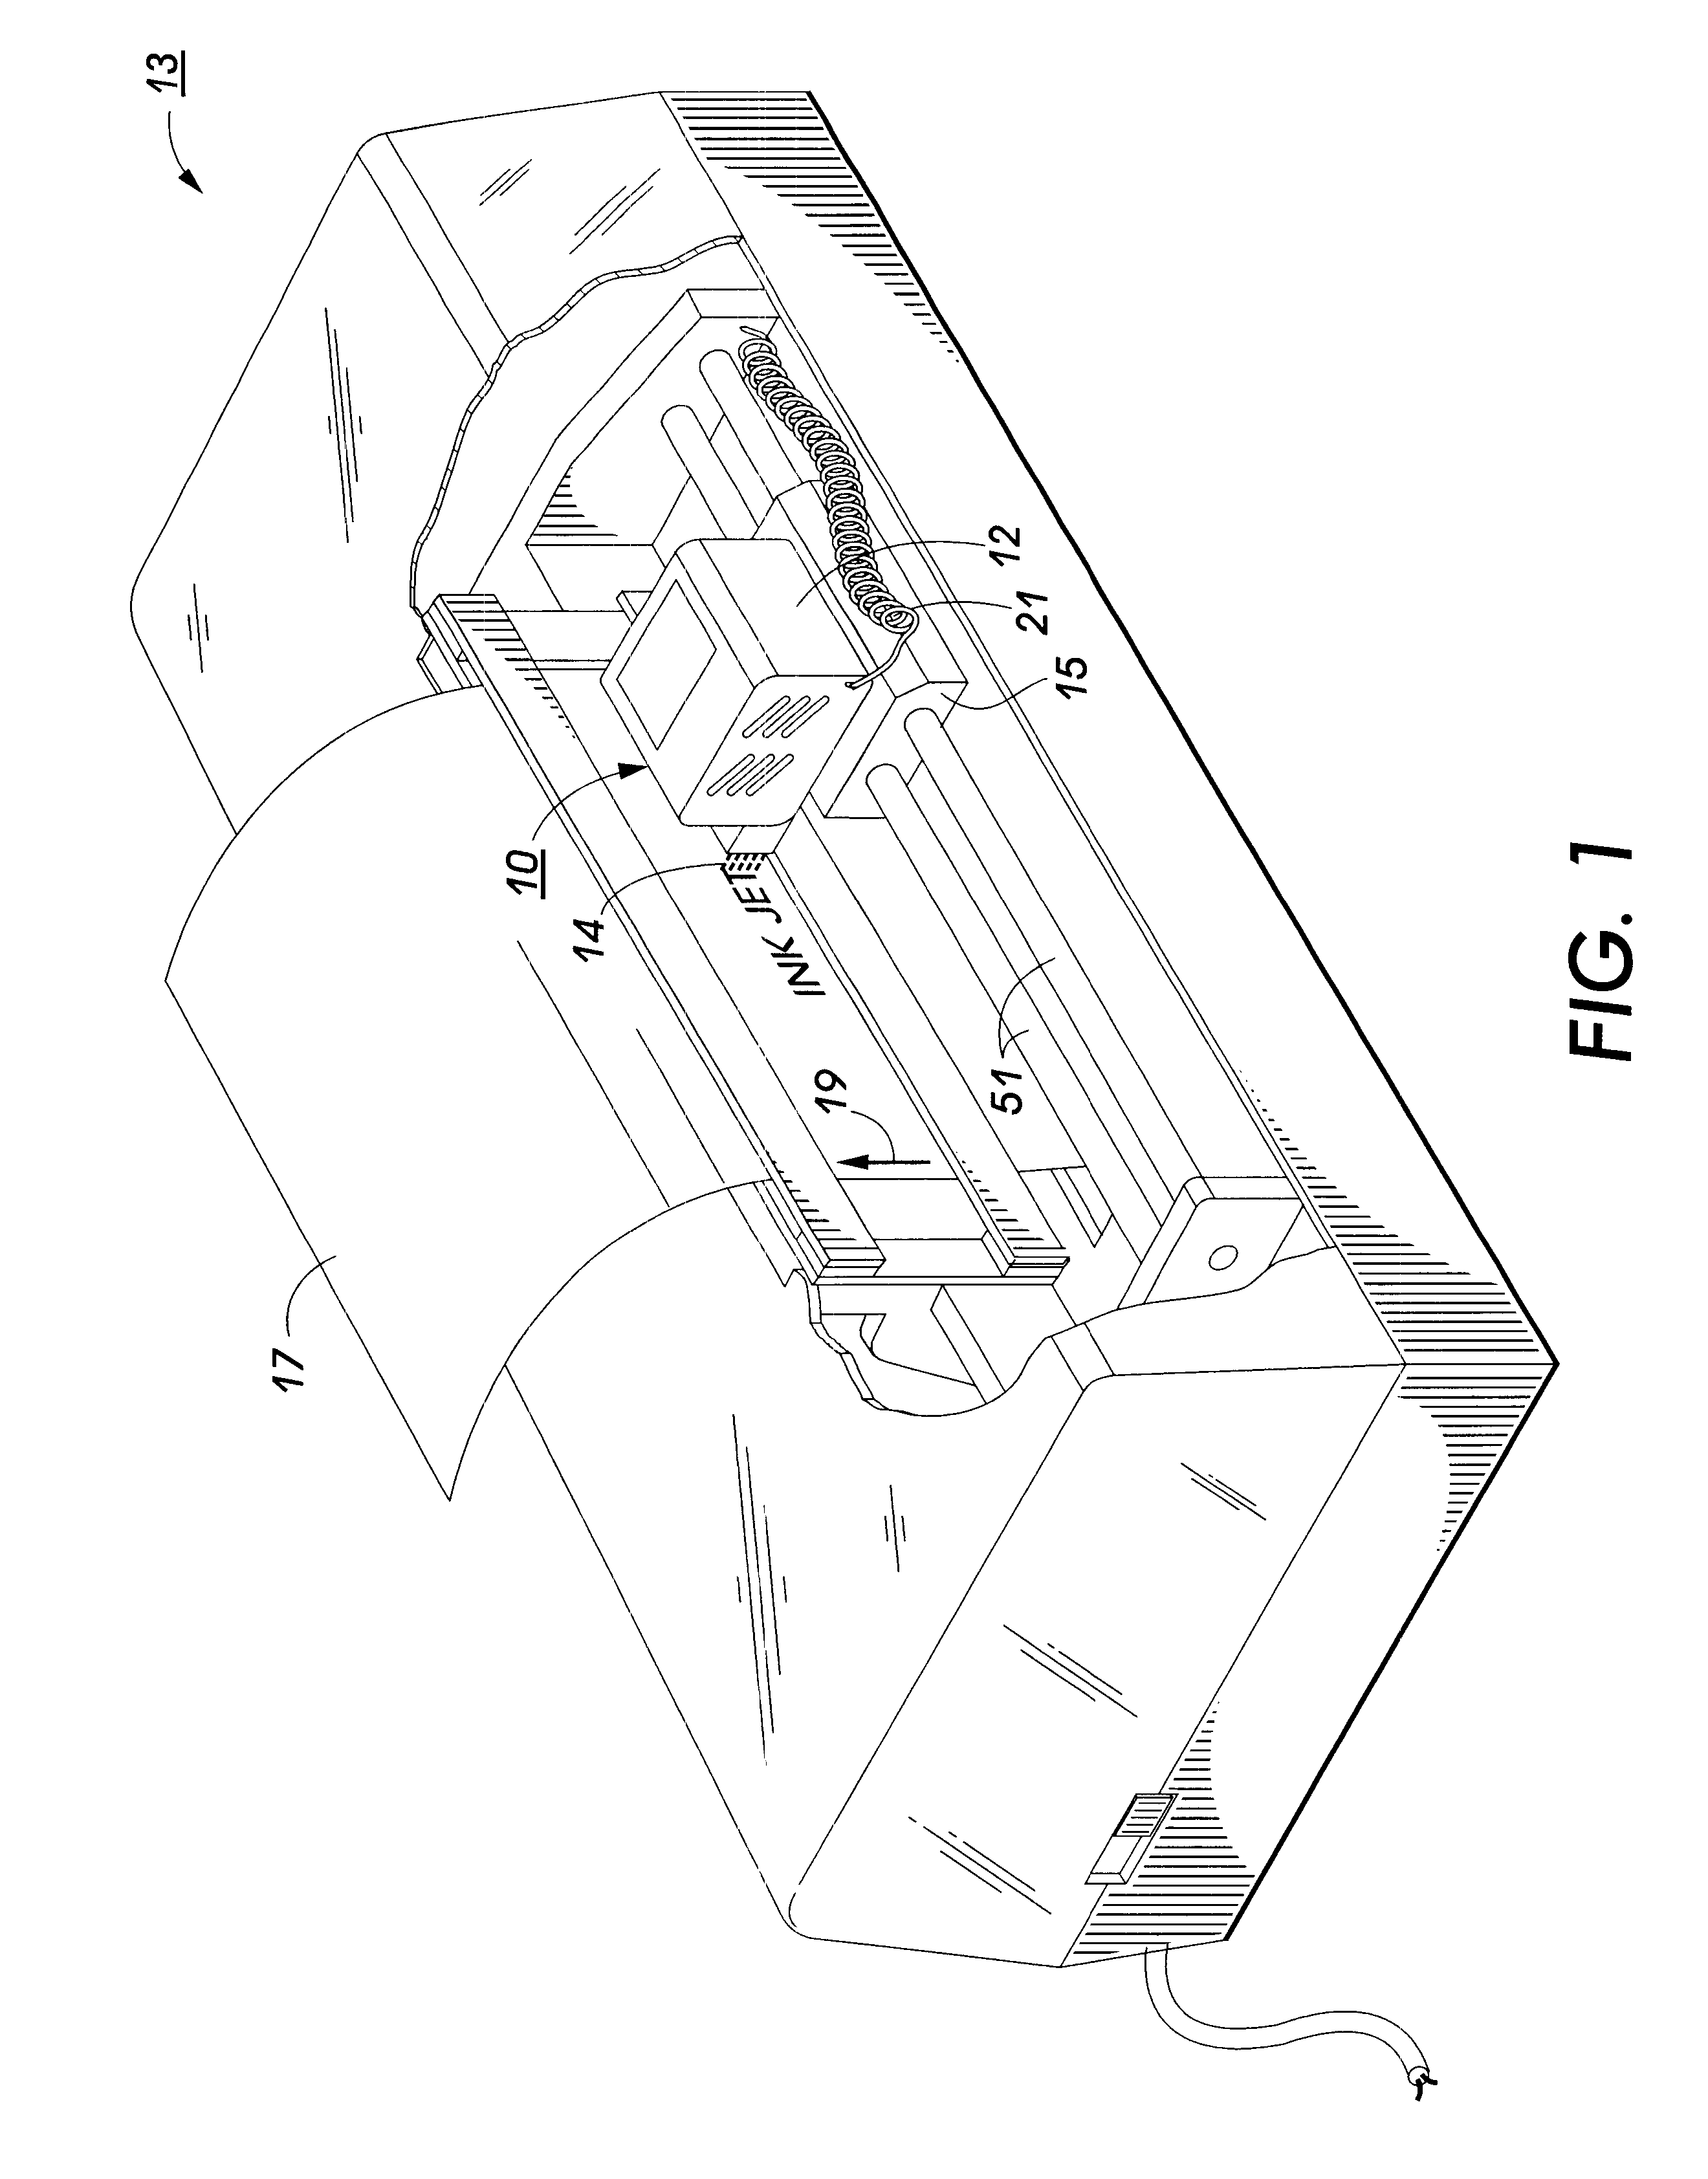 Systems and methods for controlling depths of a laser cut